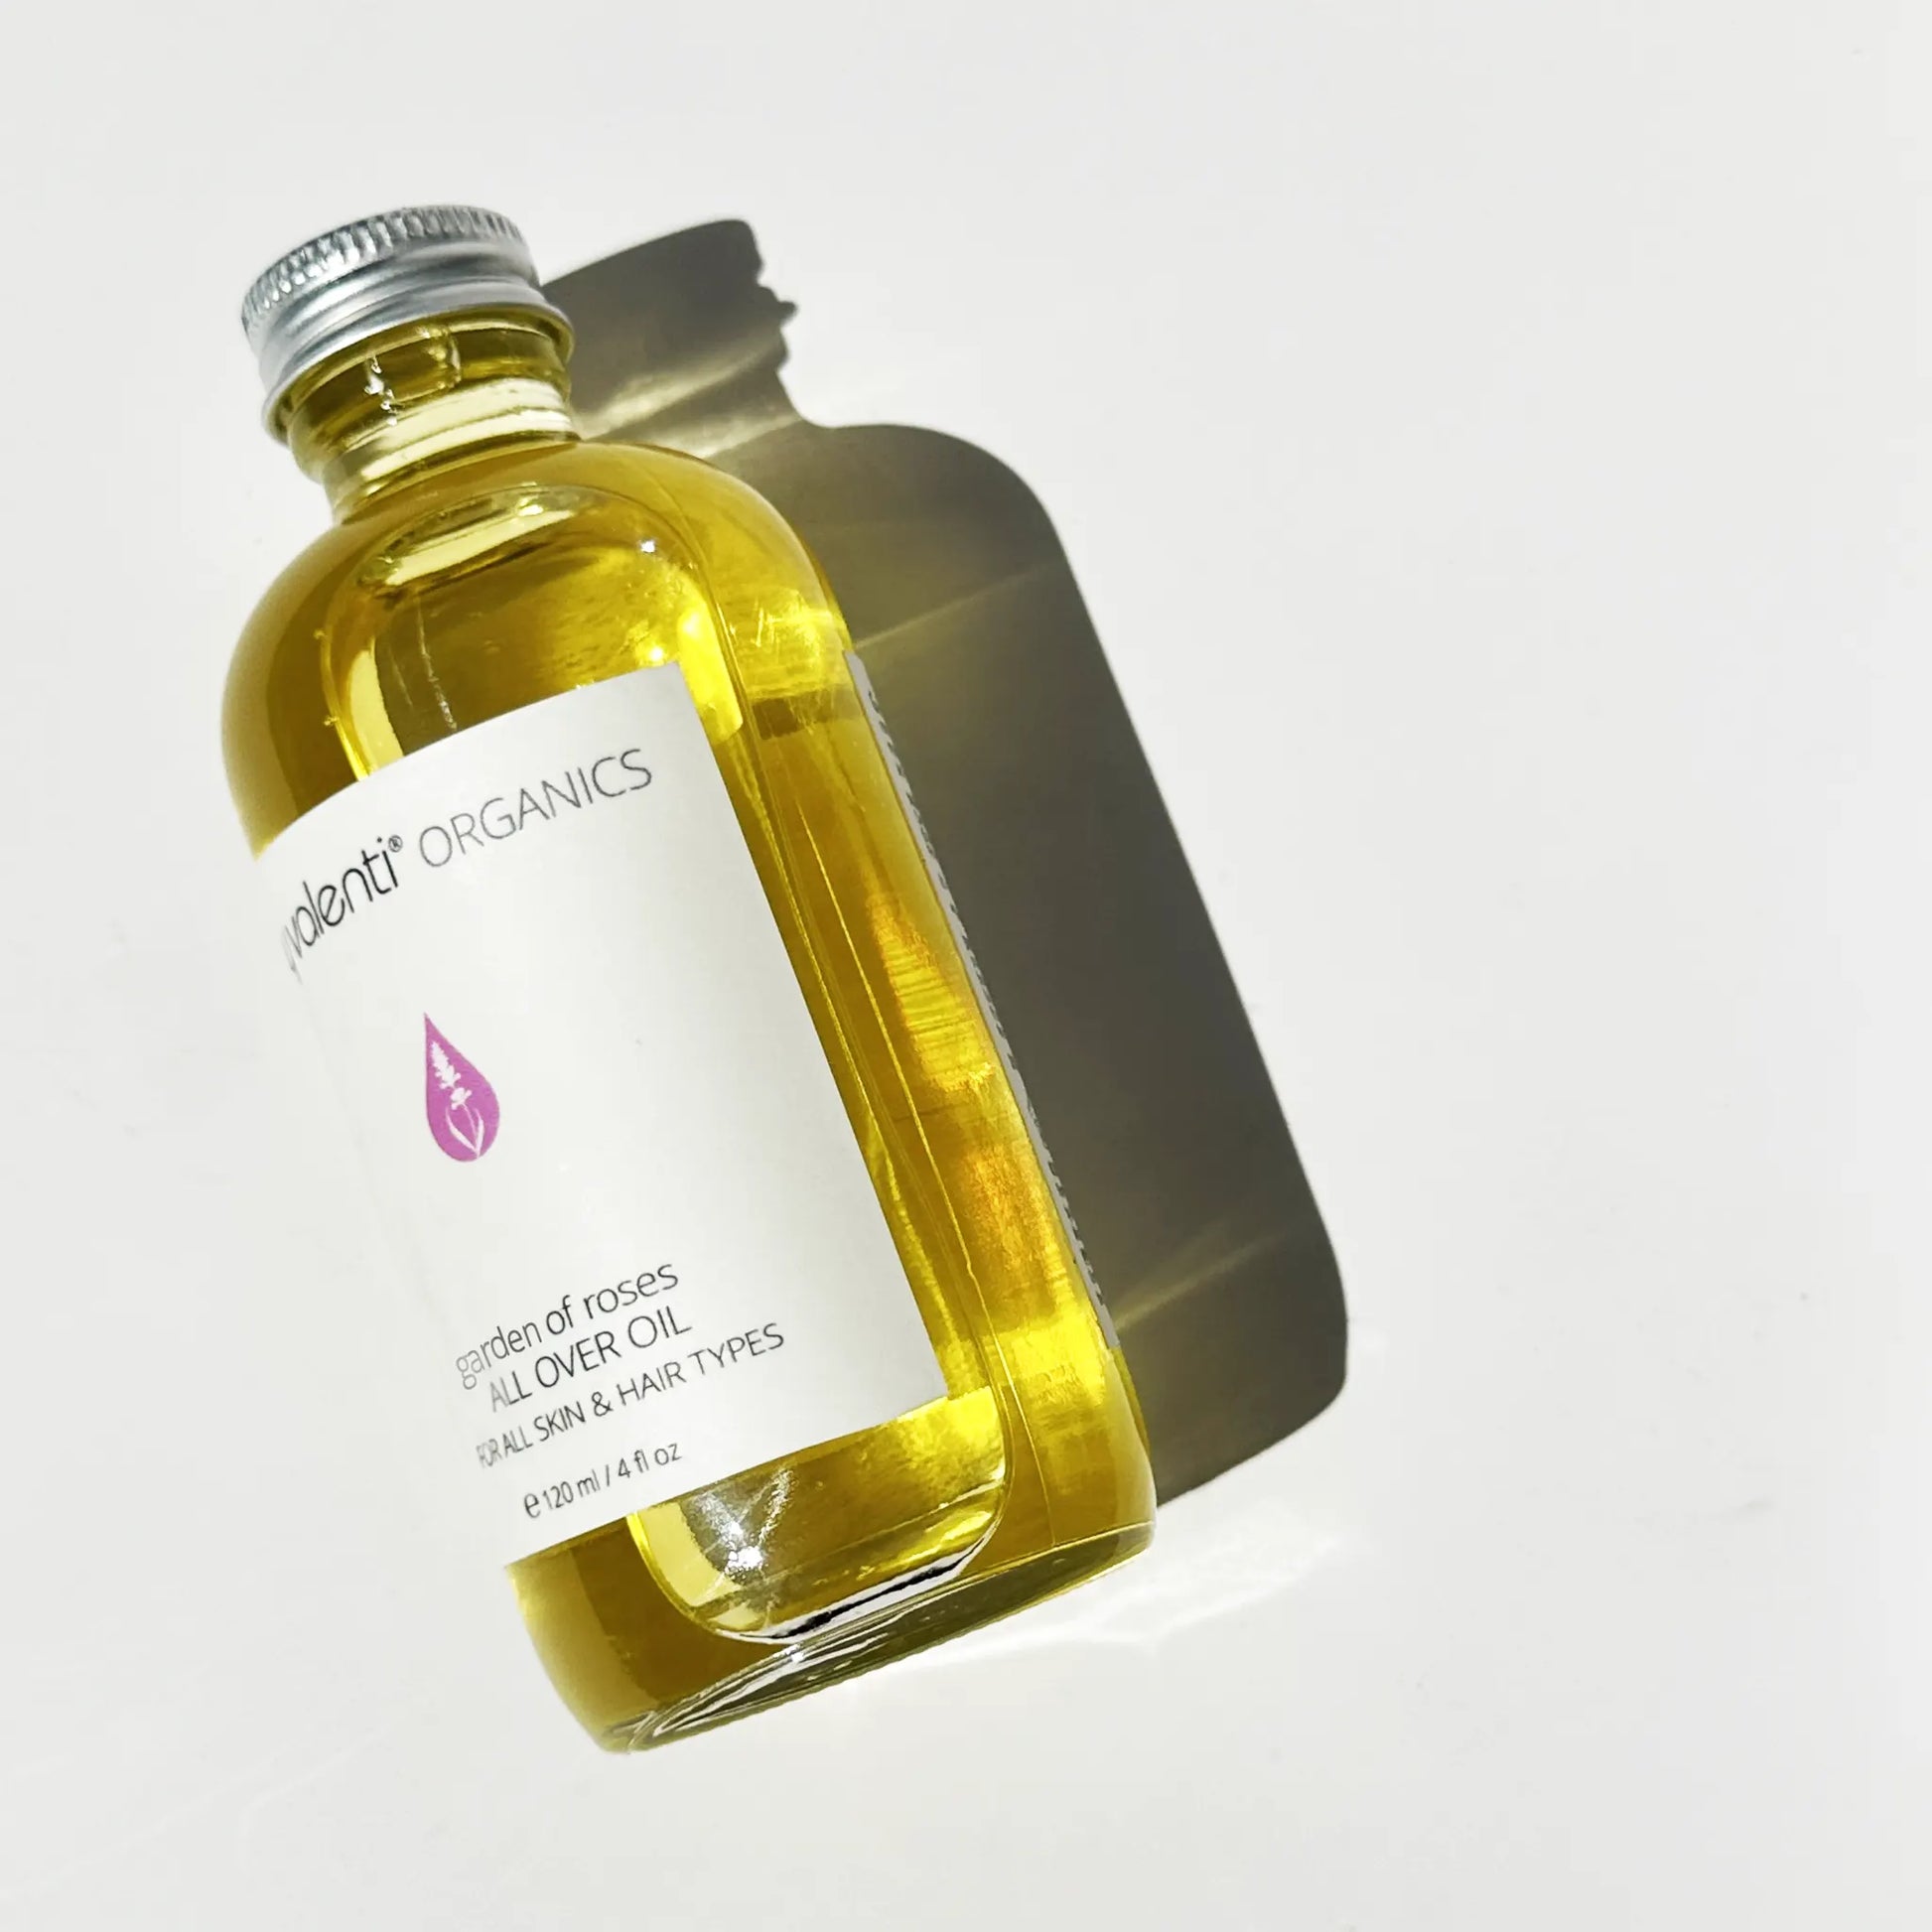 By Valenti Organics Garden of Roses Body Oil for Healthier and Happier Skin